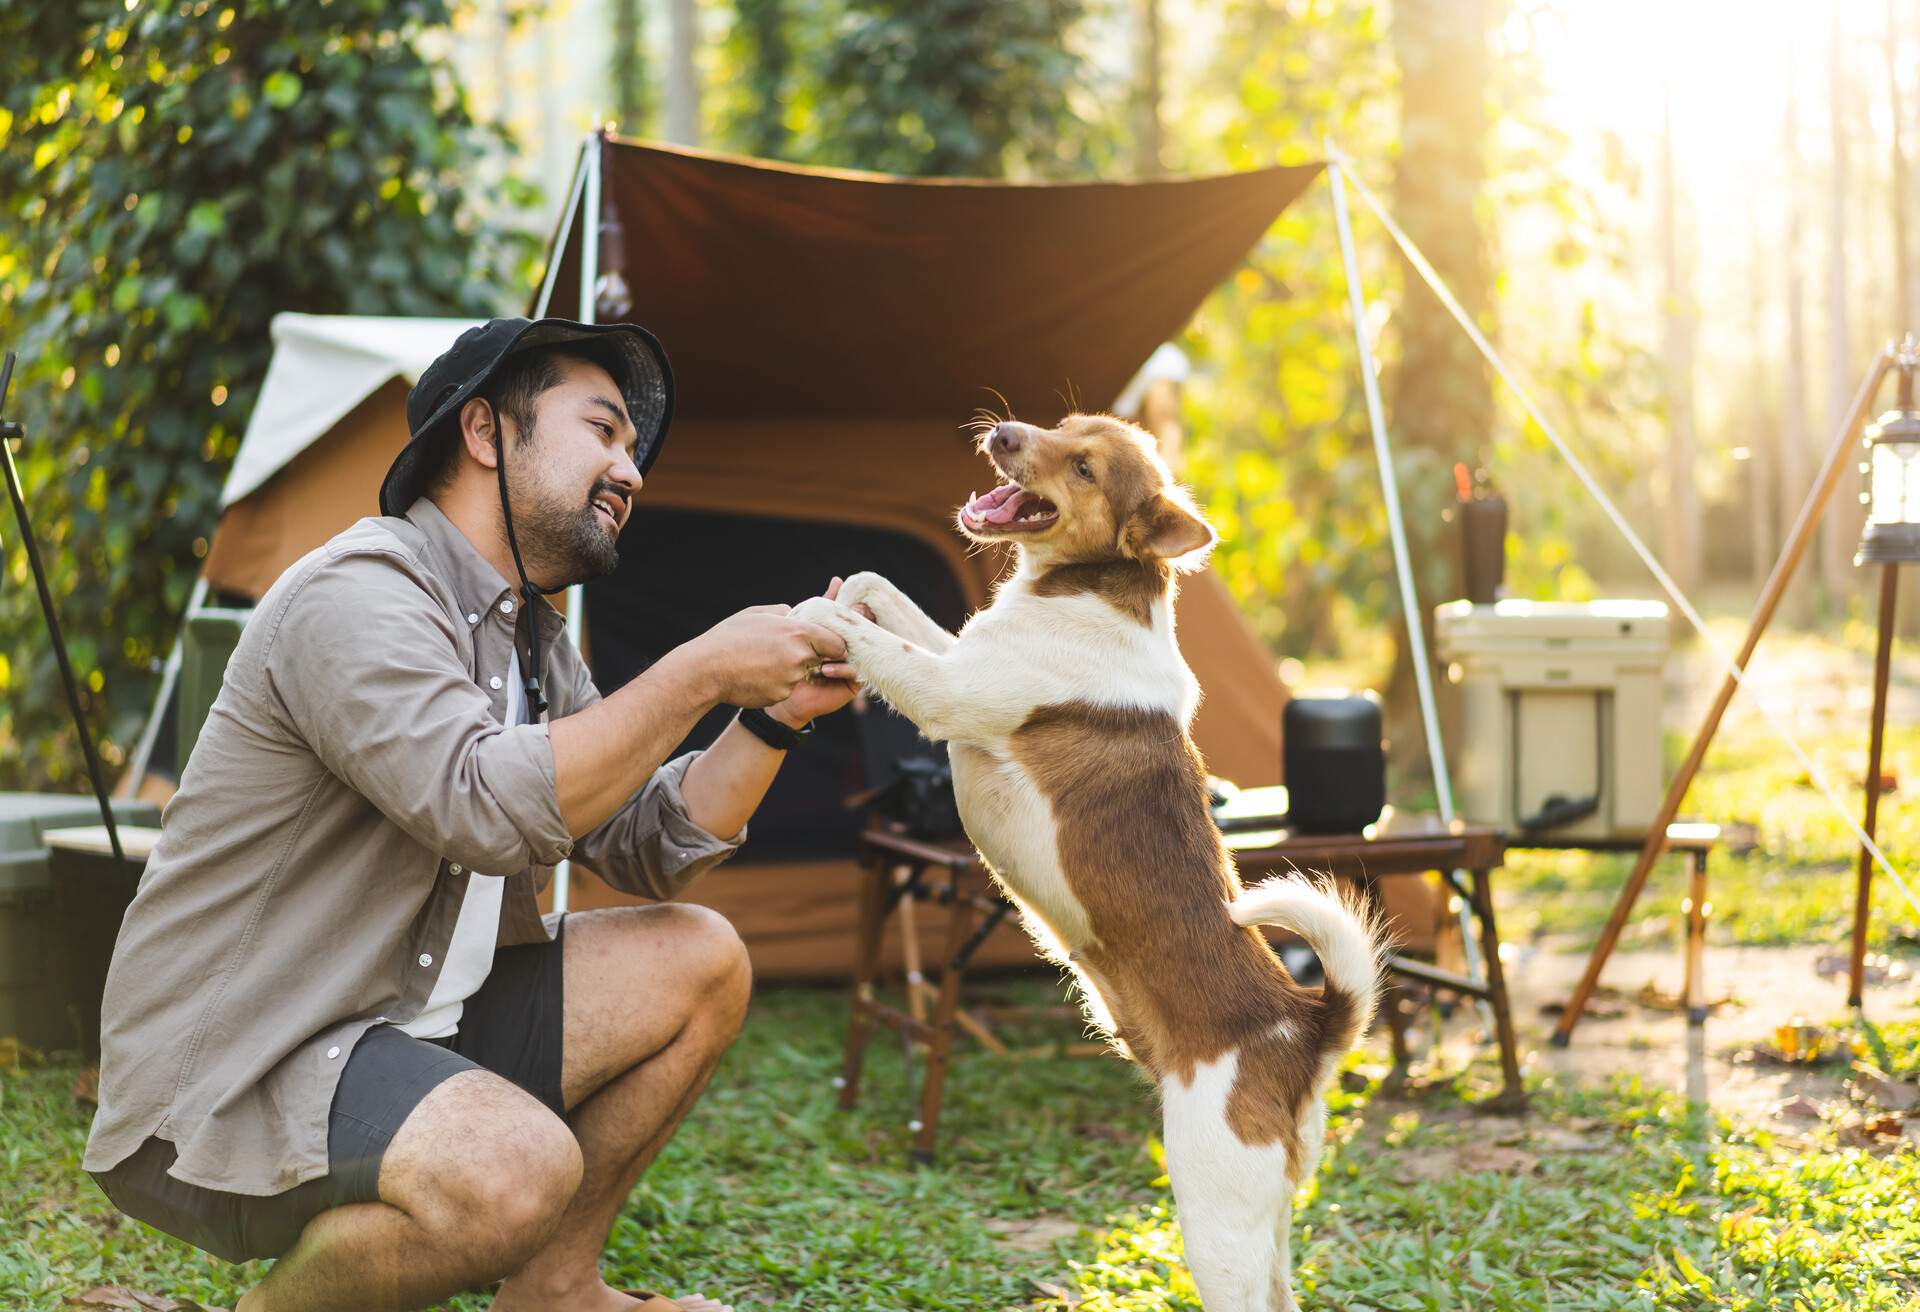 THEME_CAMPING_PEOPLE_MAN_DOG_GettyImages-1366211195